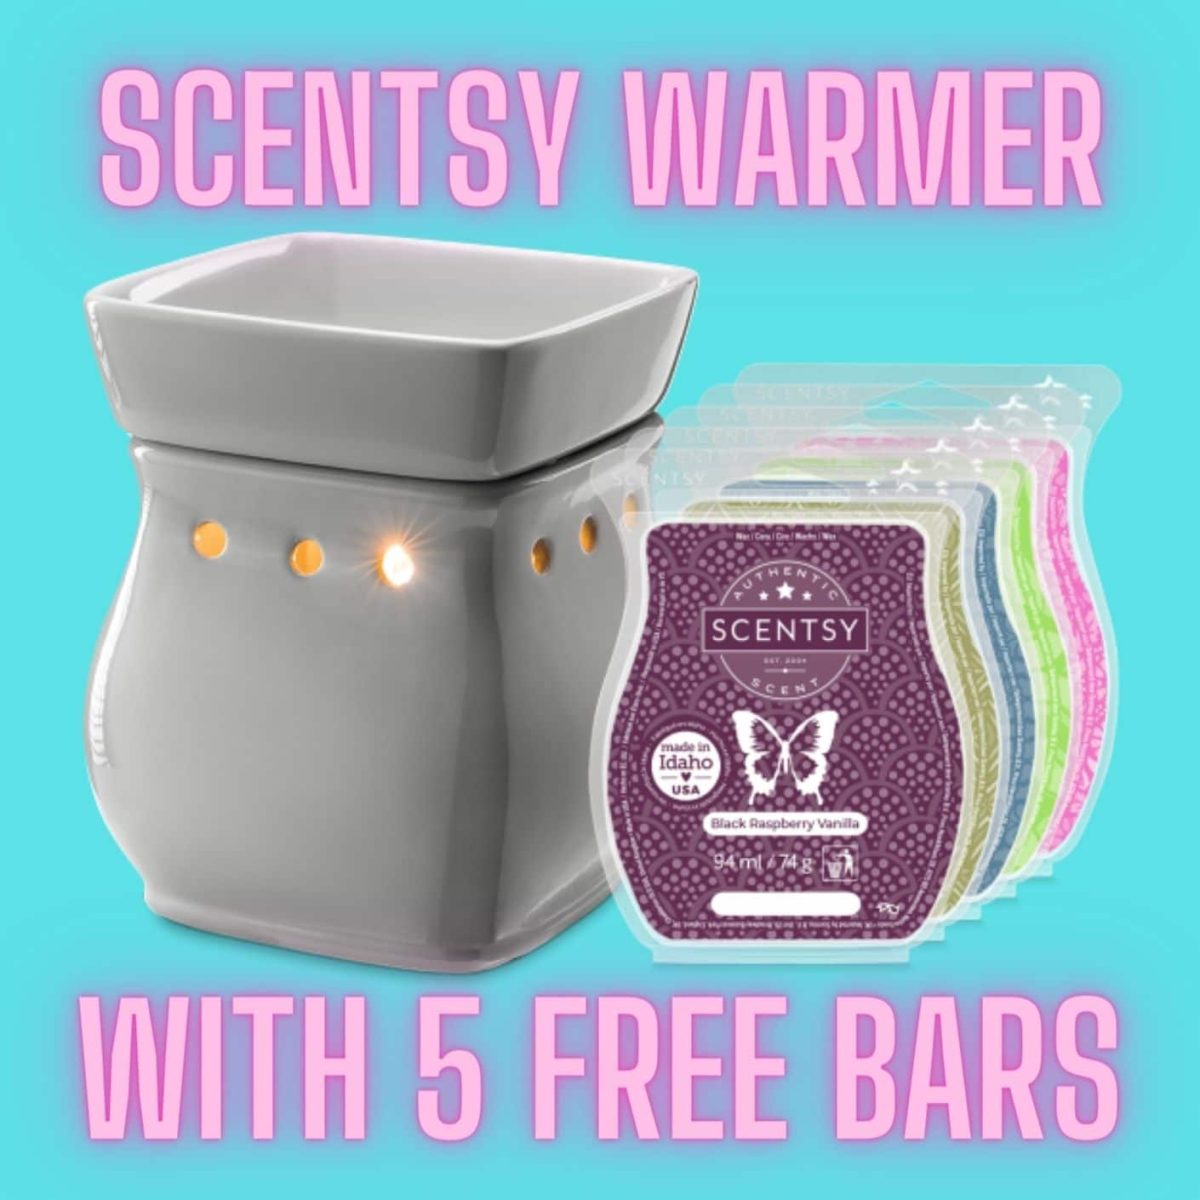 Best-Ever Gift For Her - Classic Curve Scentsy Warmer With 5 FREE Bars